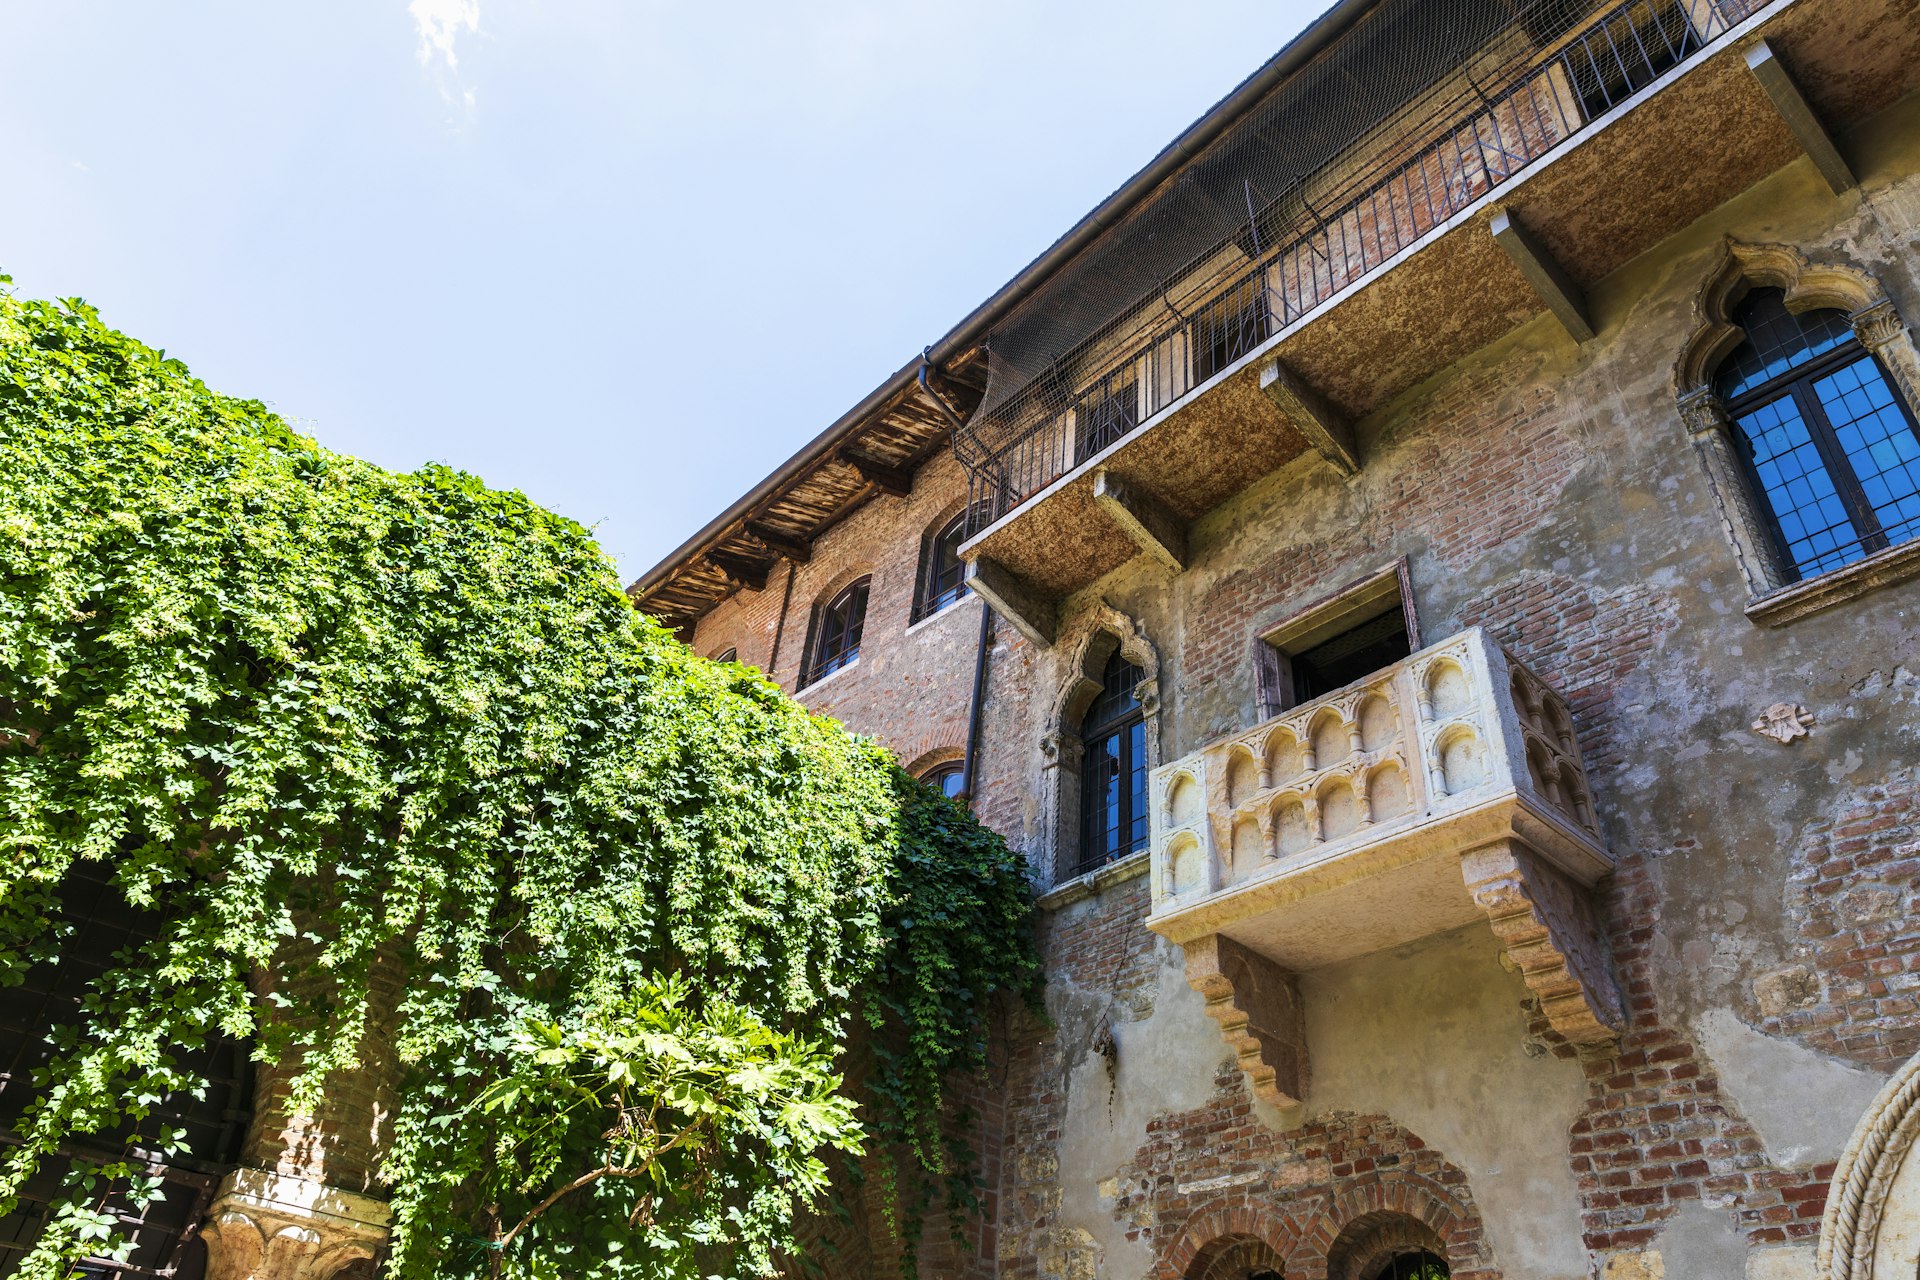 The iconic balcony of Juliet's house in Verona, Italy